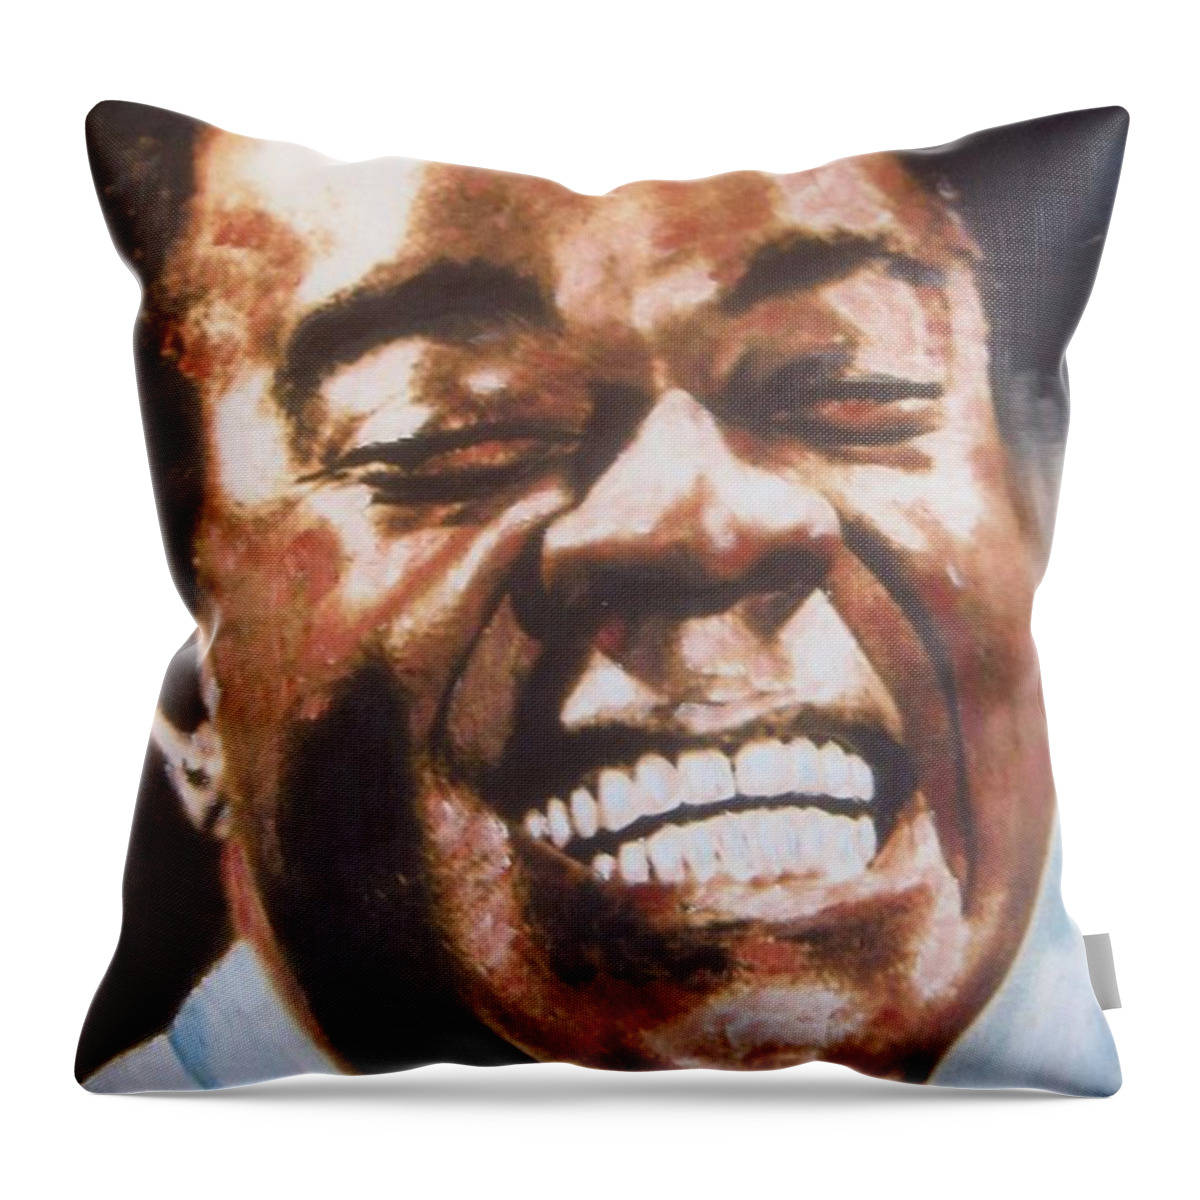 Sax Throw Pillow featuring the painting Louis Armstrong by Sam Shaker